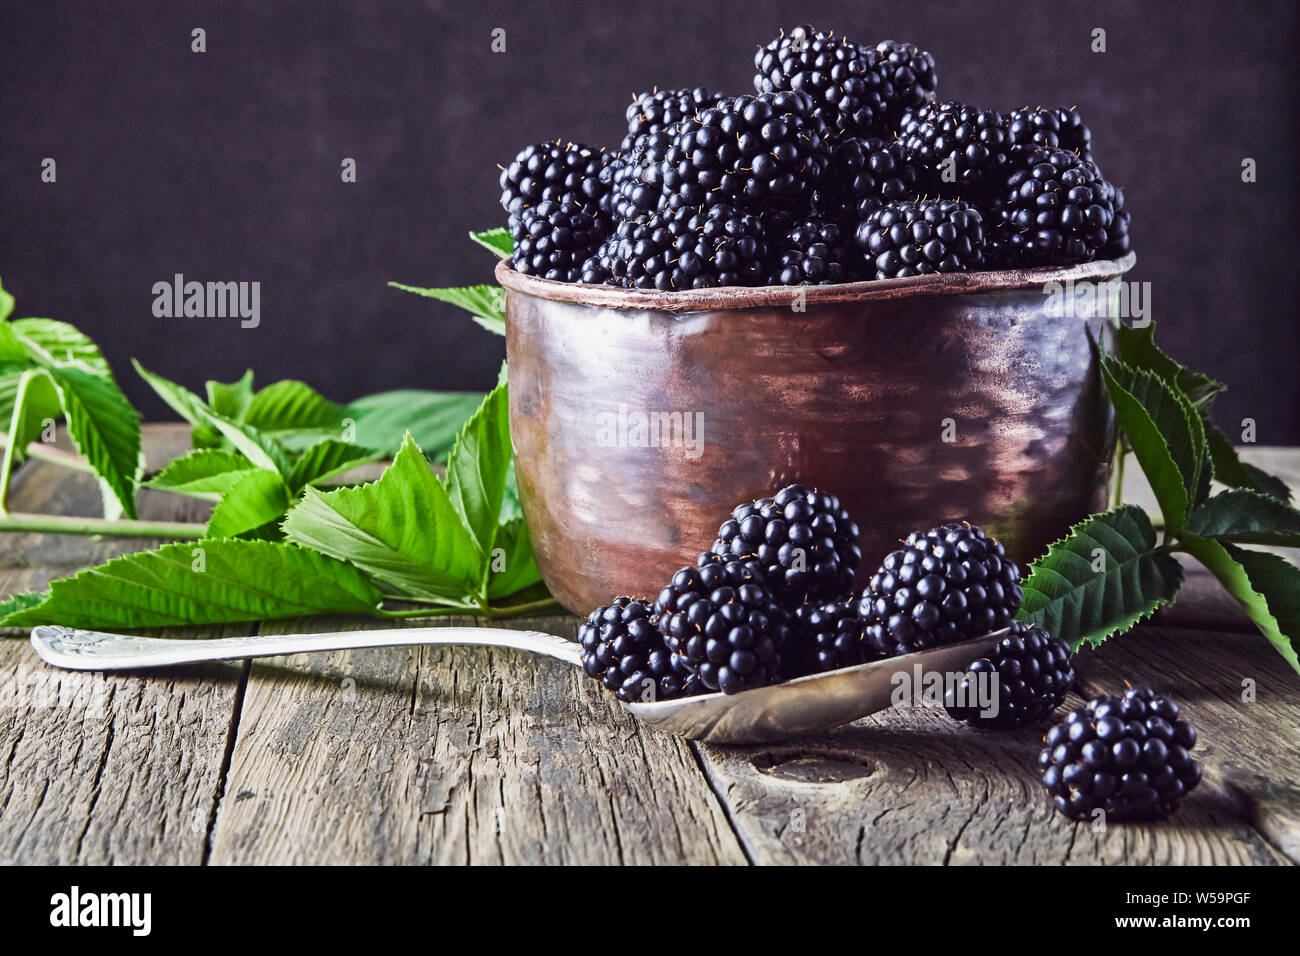 Ripe blackberries with leaves in old copper dishes on old wooden boards and lying next to a spoon on a dark background. Stock Photo